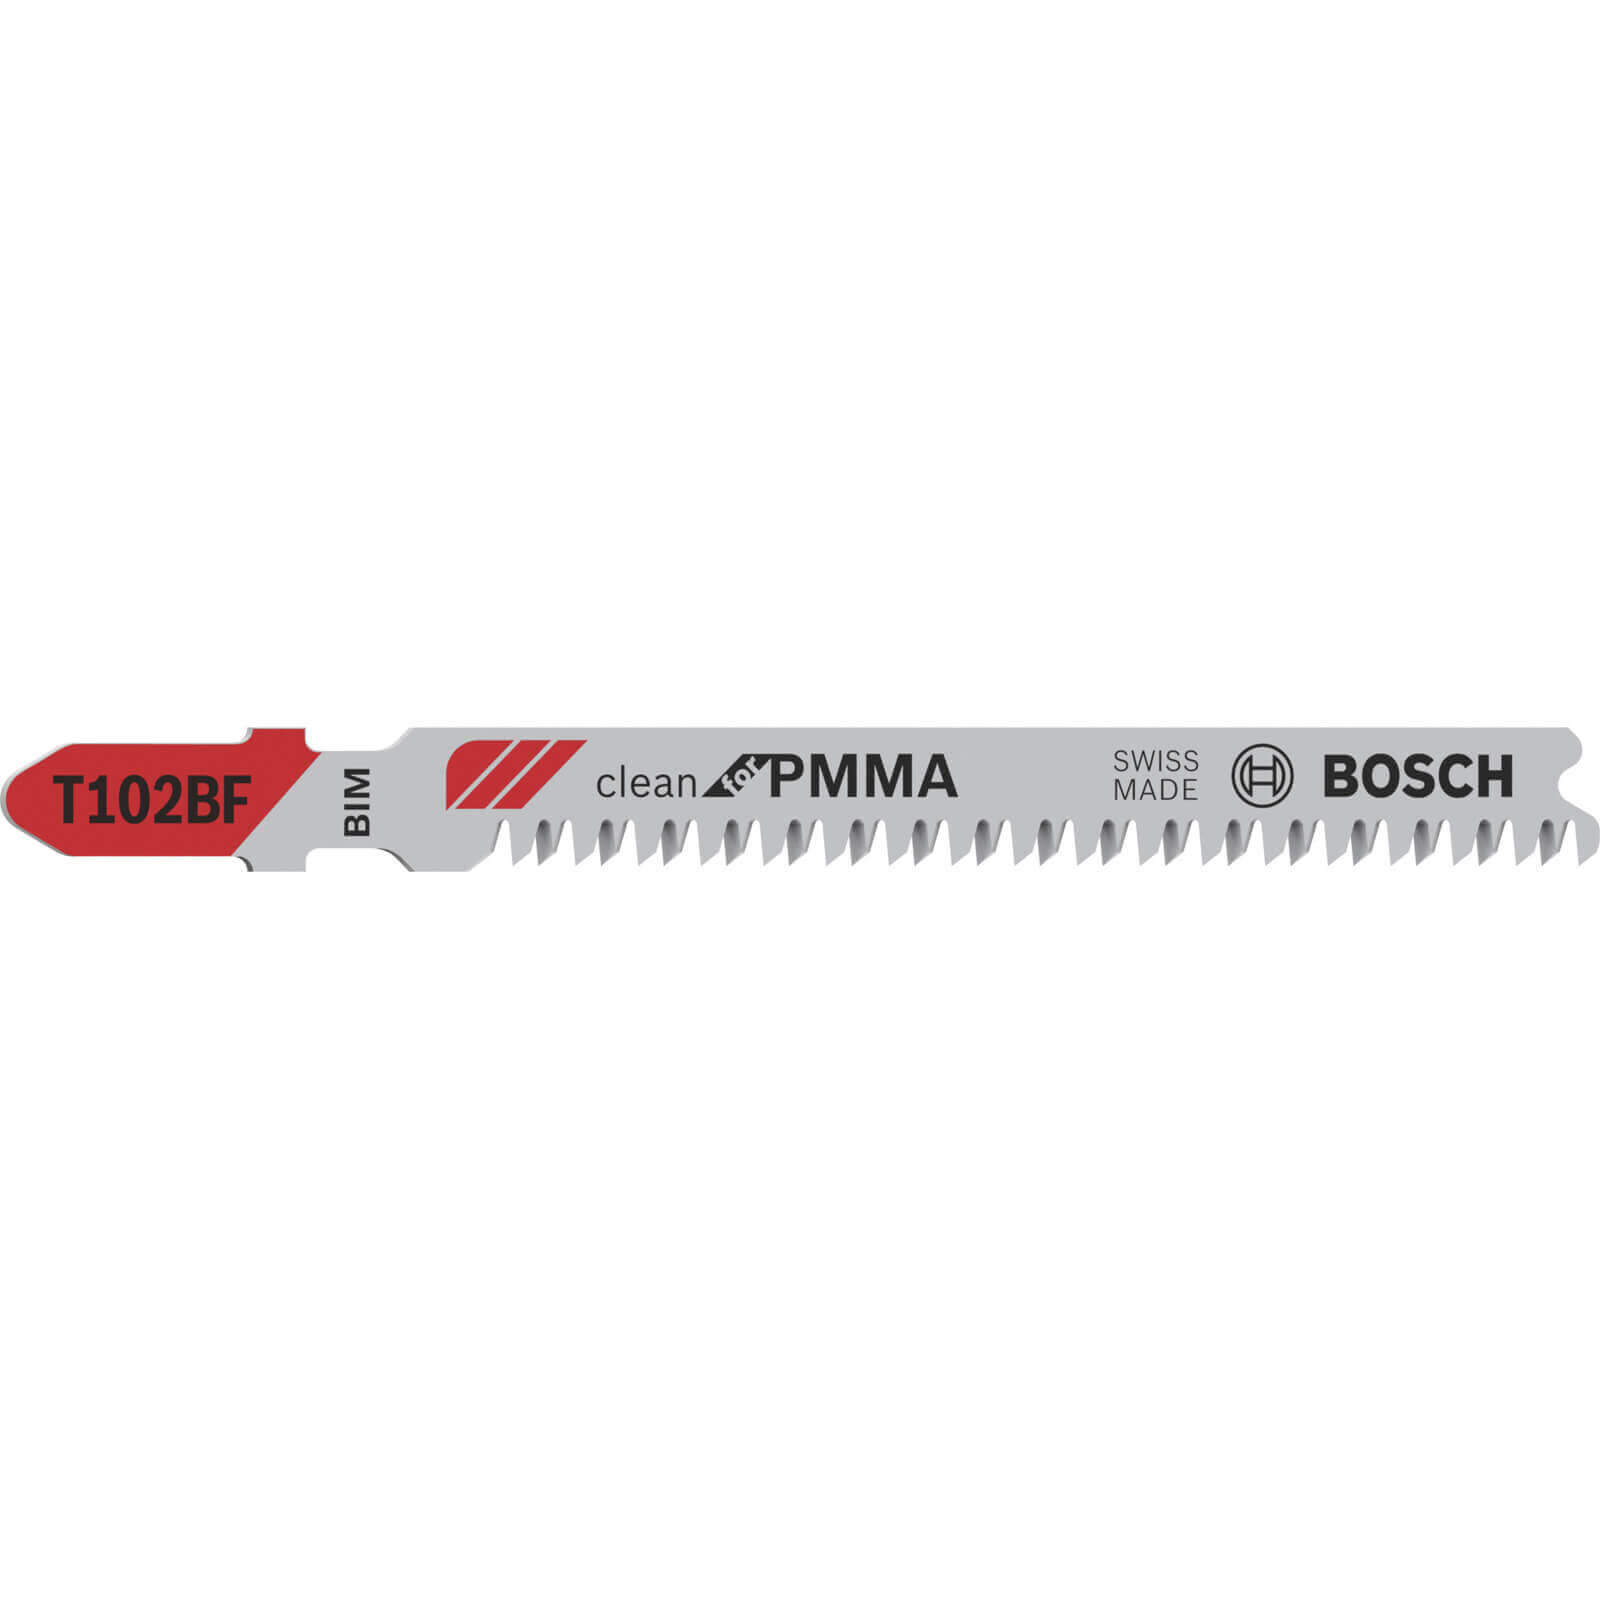 Image of Bosch T102BF Plastic Perspex Cutting Jigsaw Blade Pack of 3